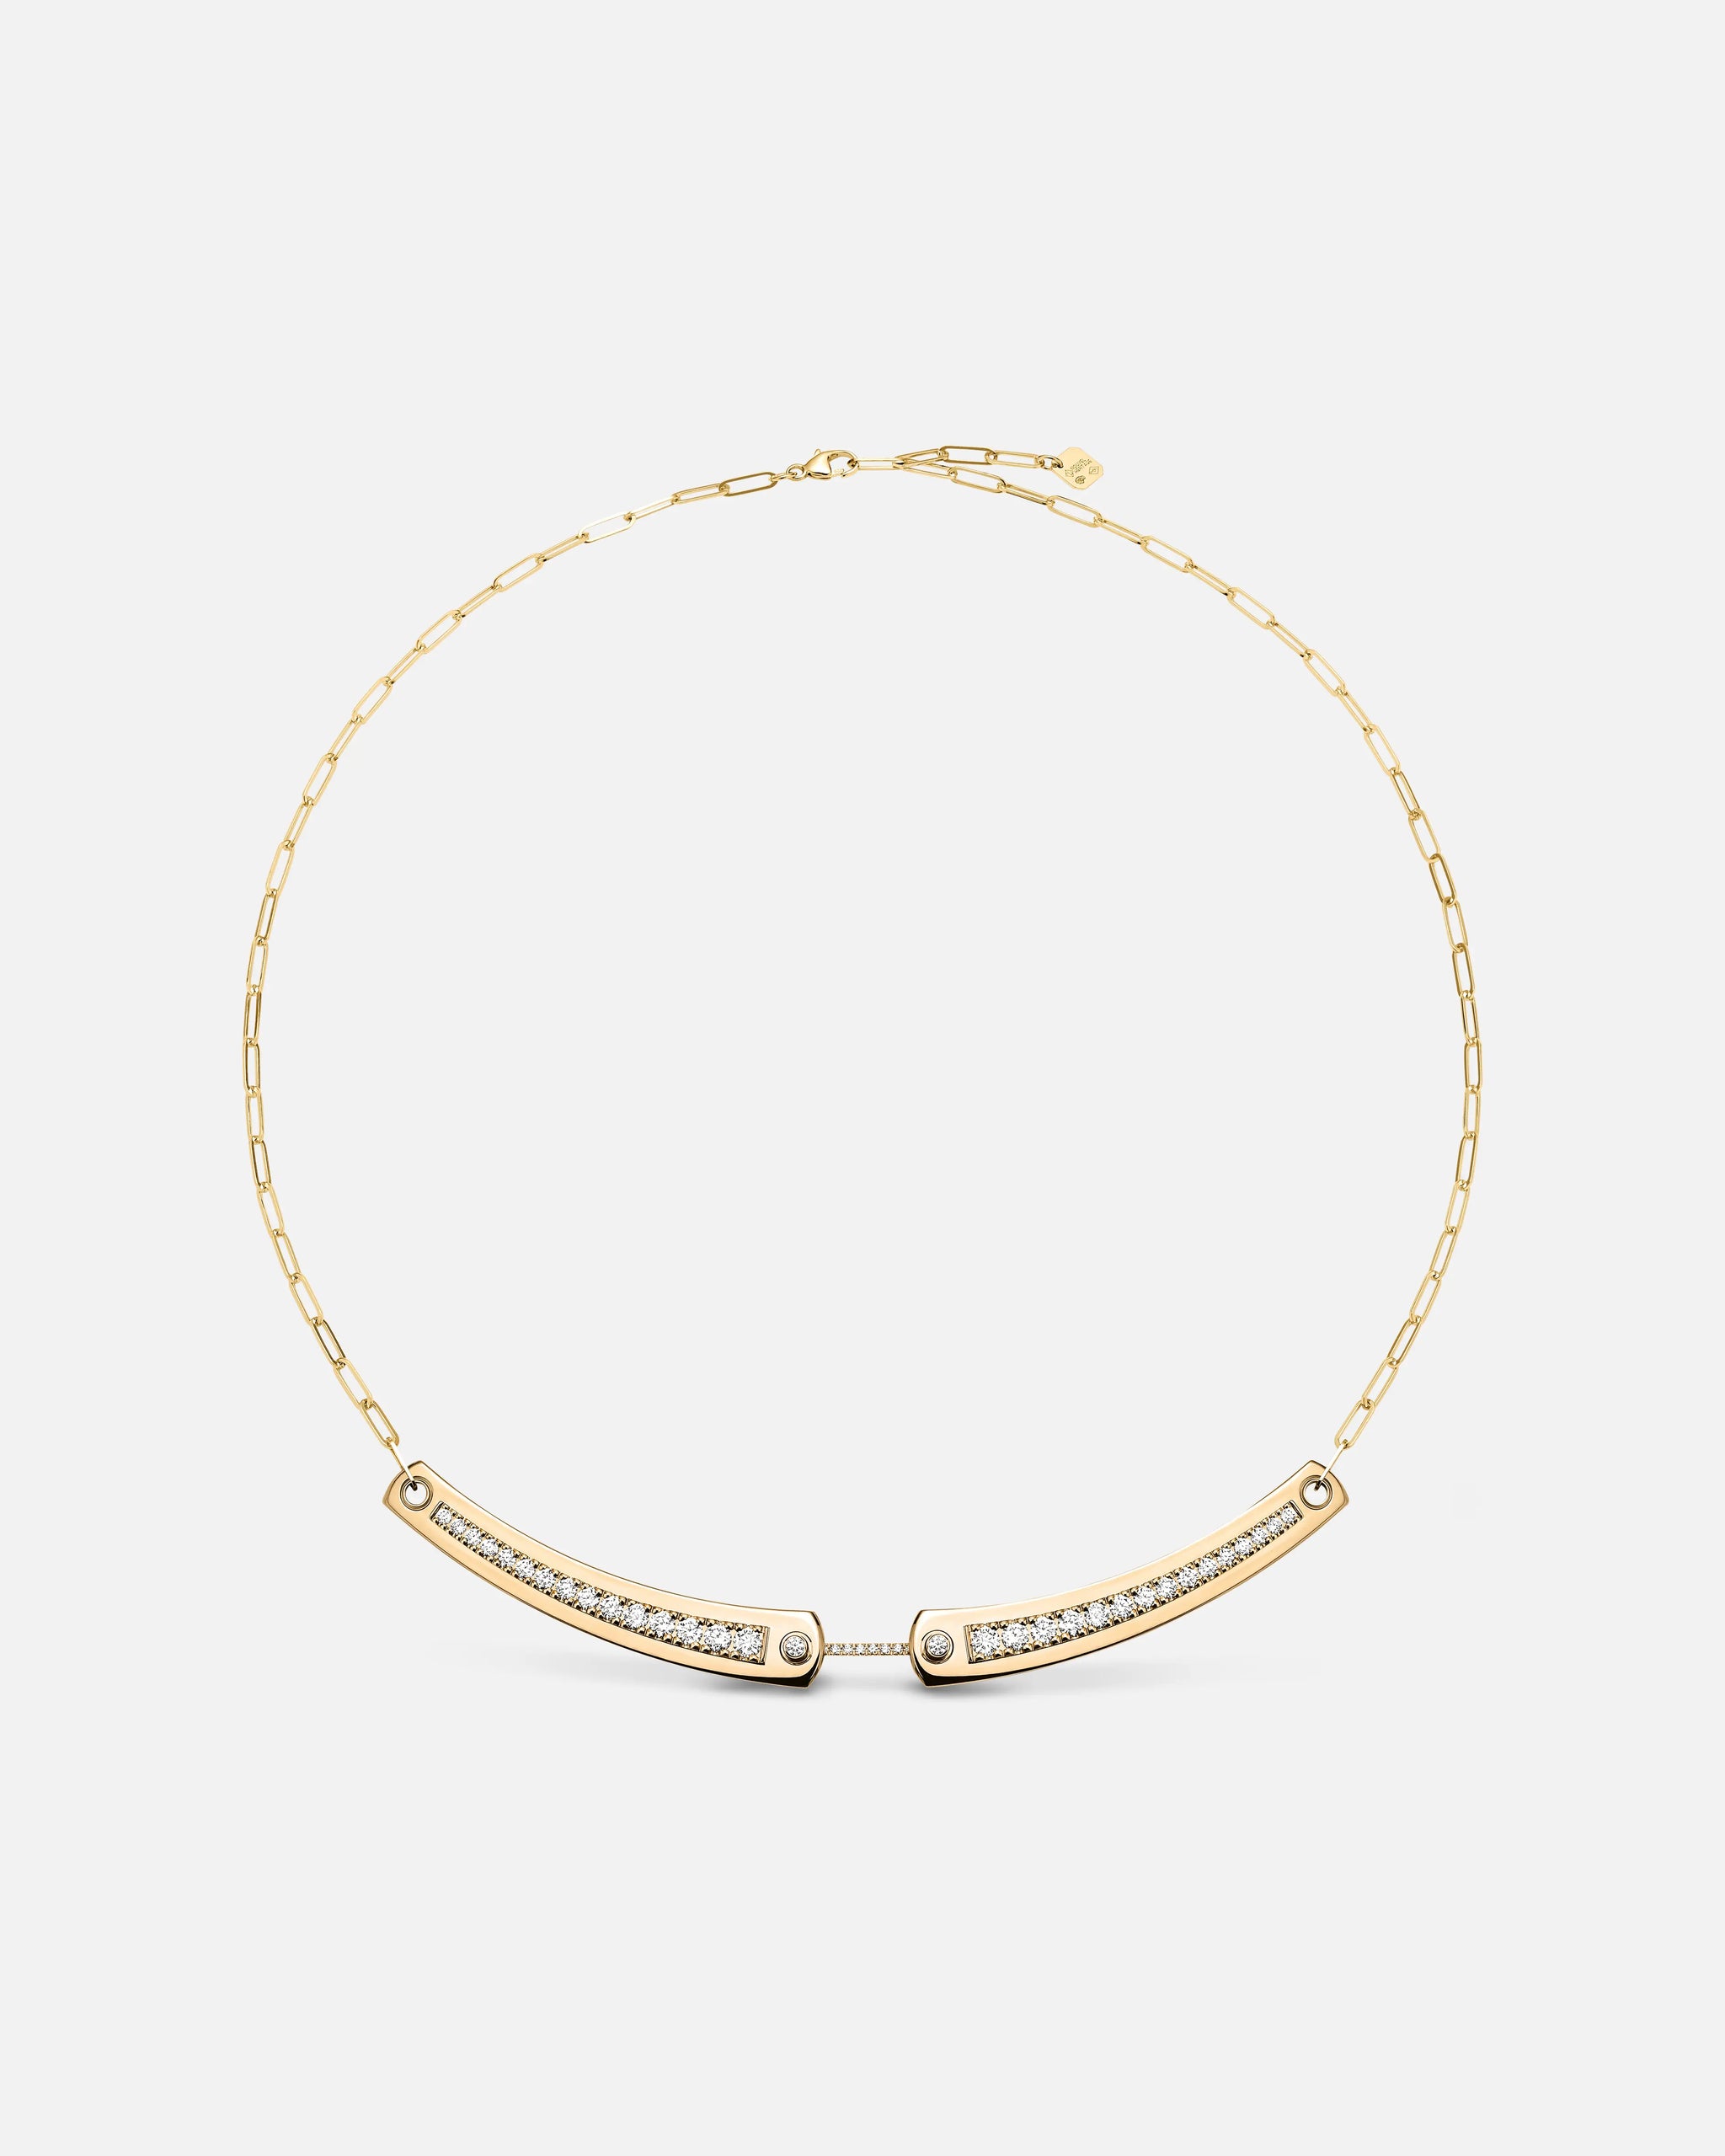 Tuxedo Mood Necklace in Yellow Gold - 1 - Nouvel Heritage